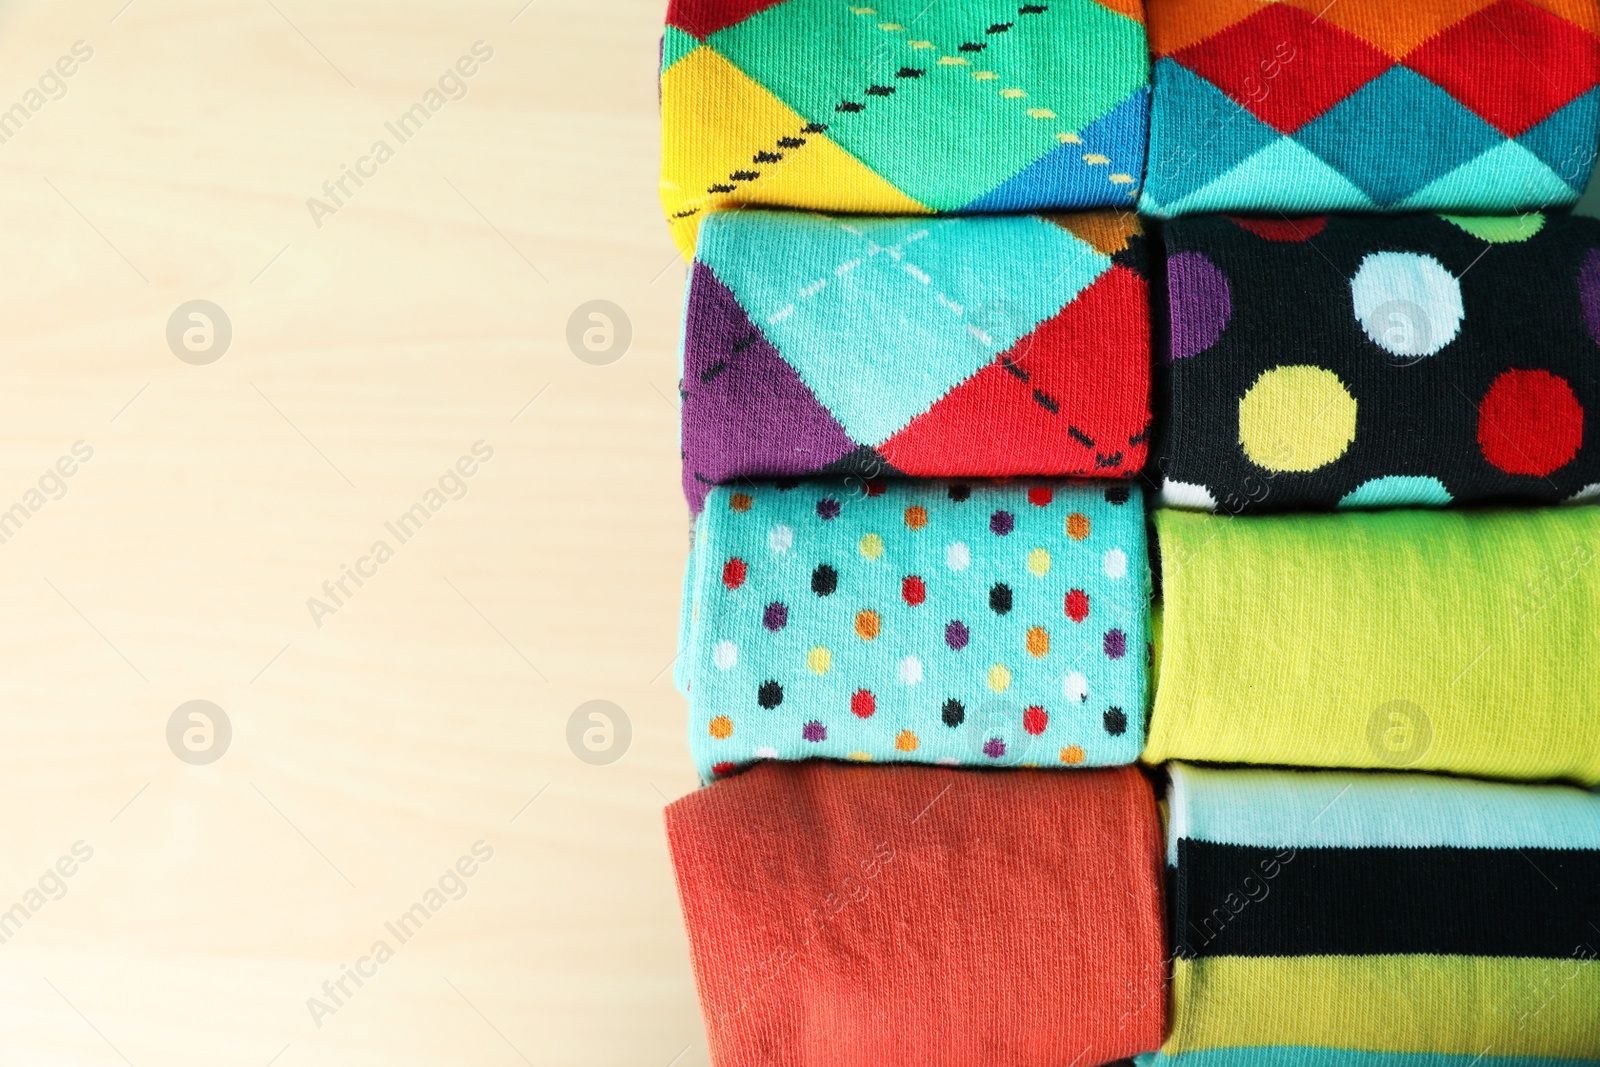 Photo of Rolled colorful socks on light background, top view